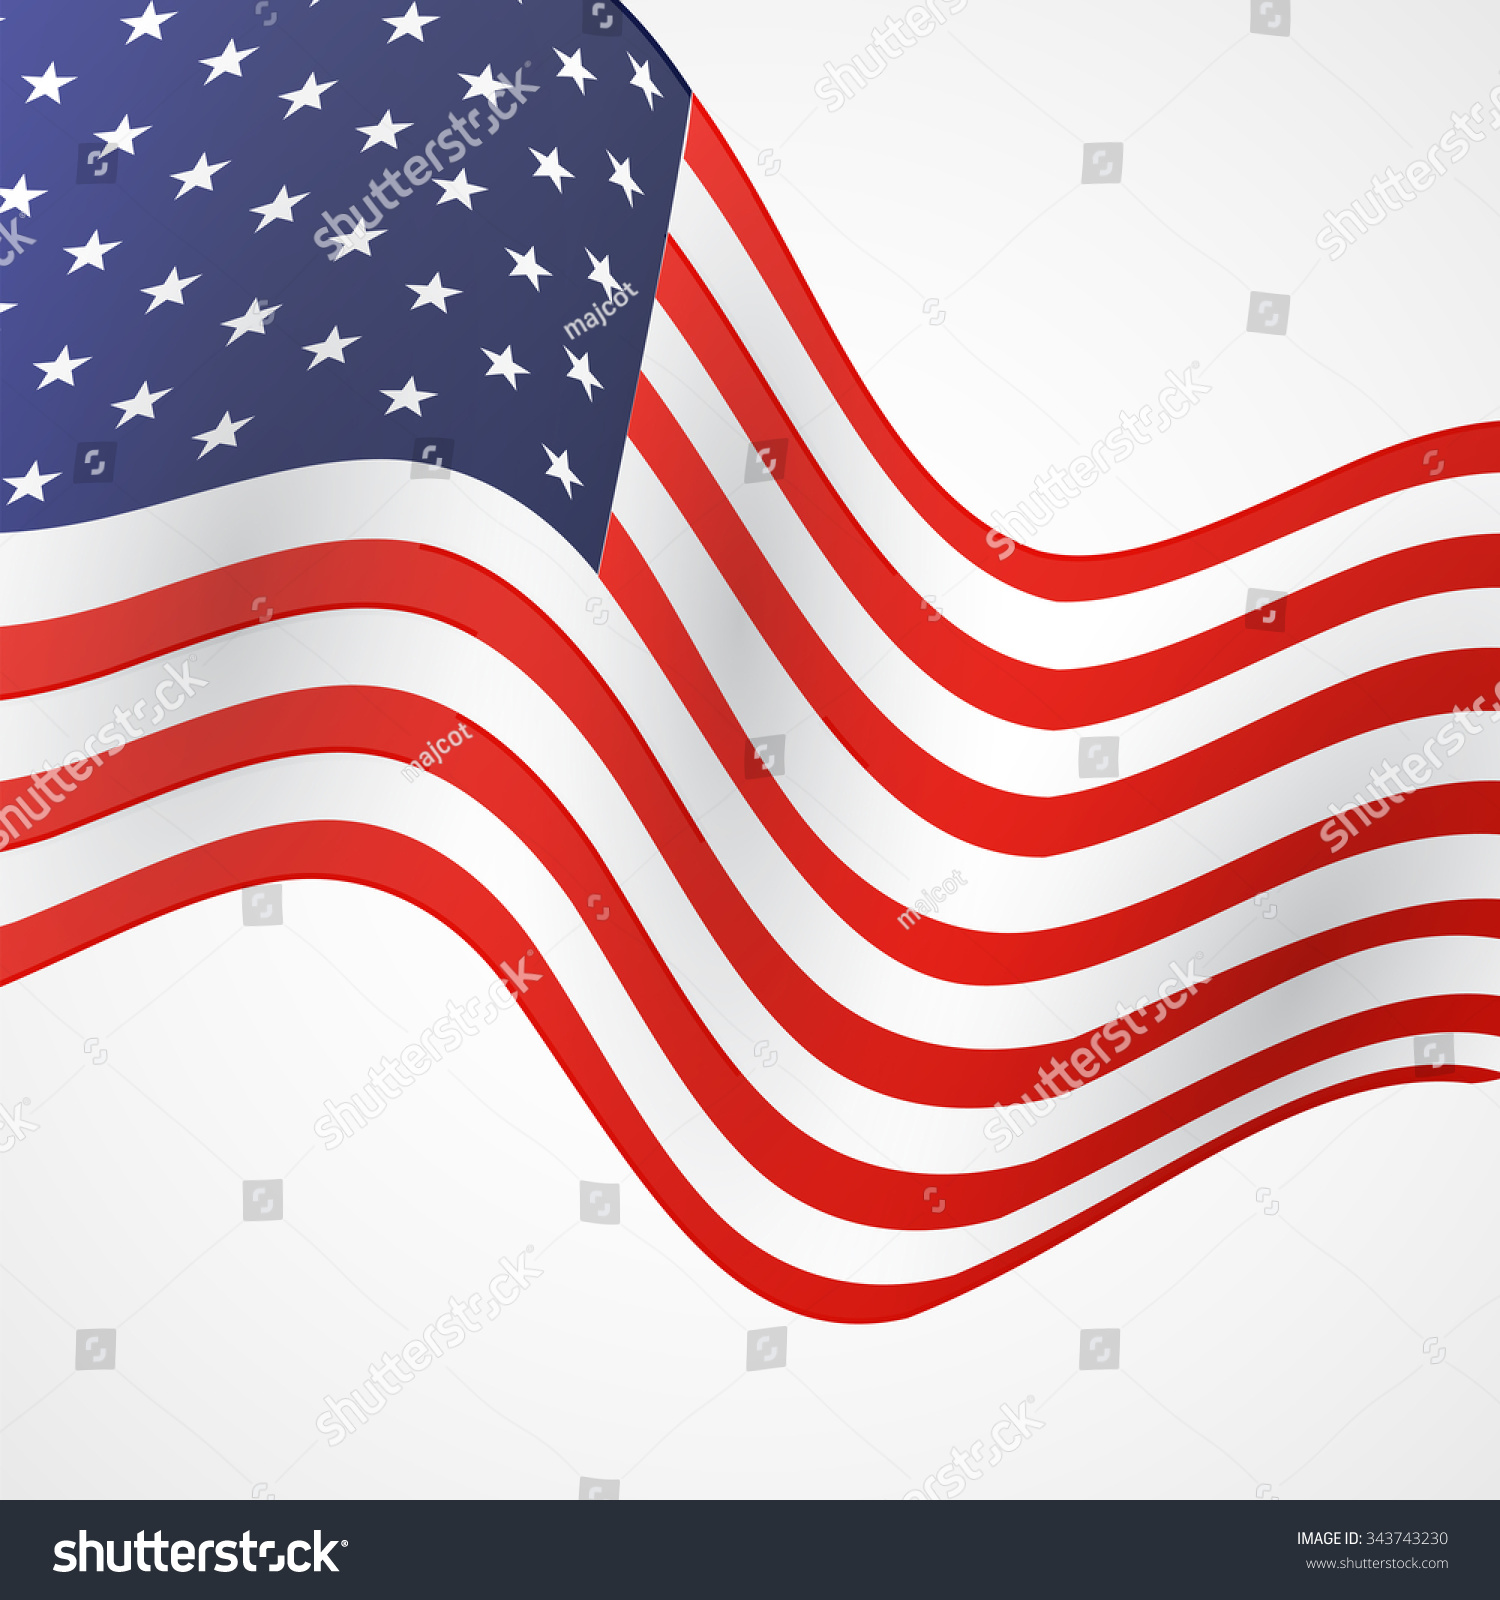 Closeup of American flag on white background #343743230